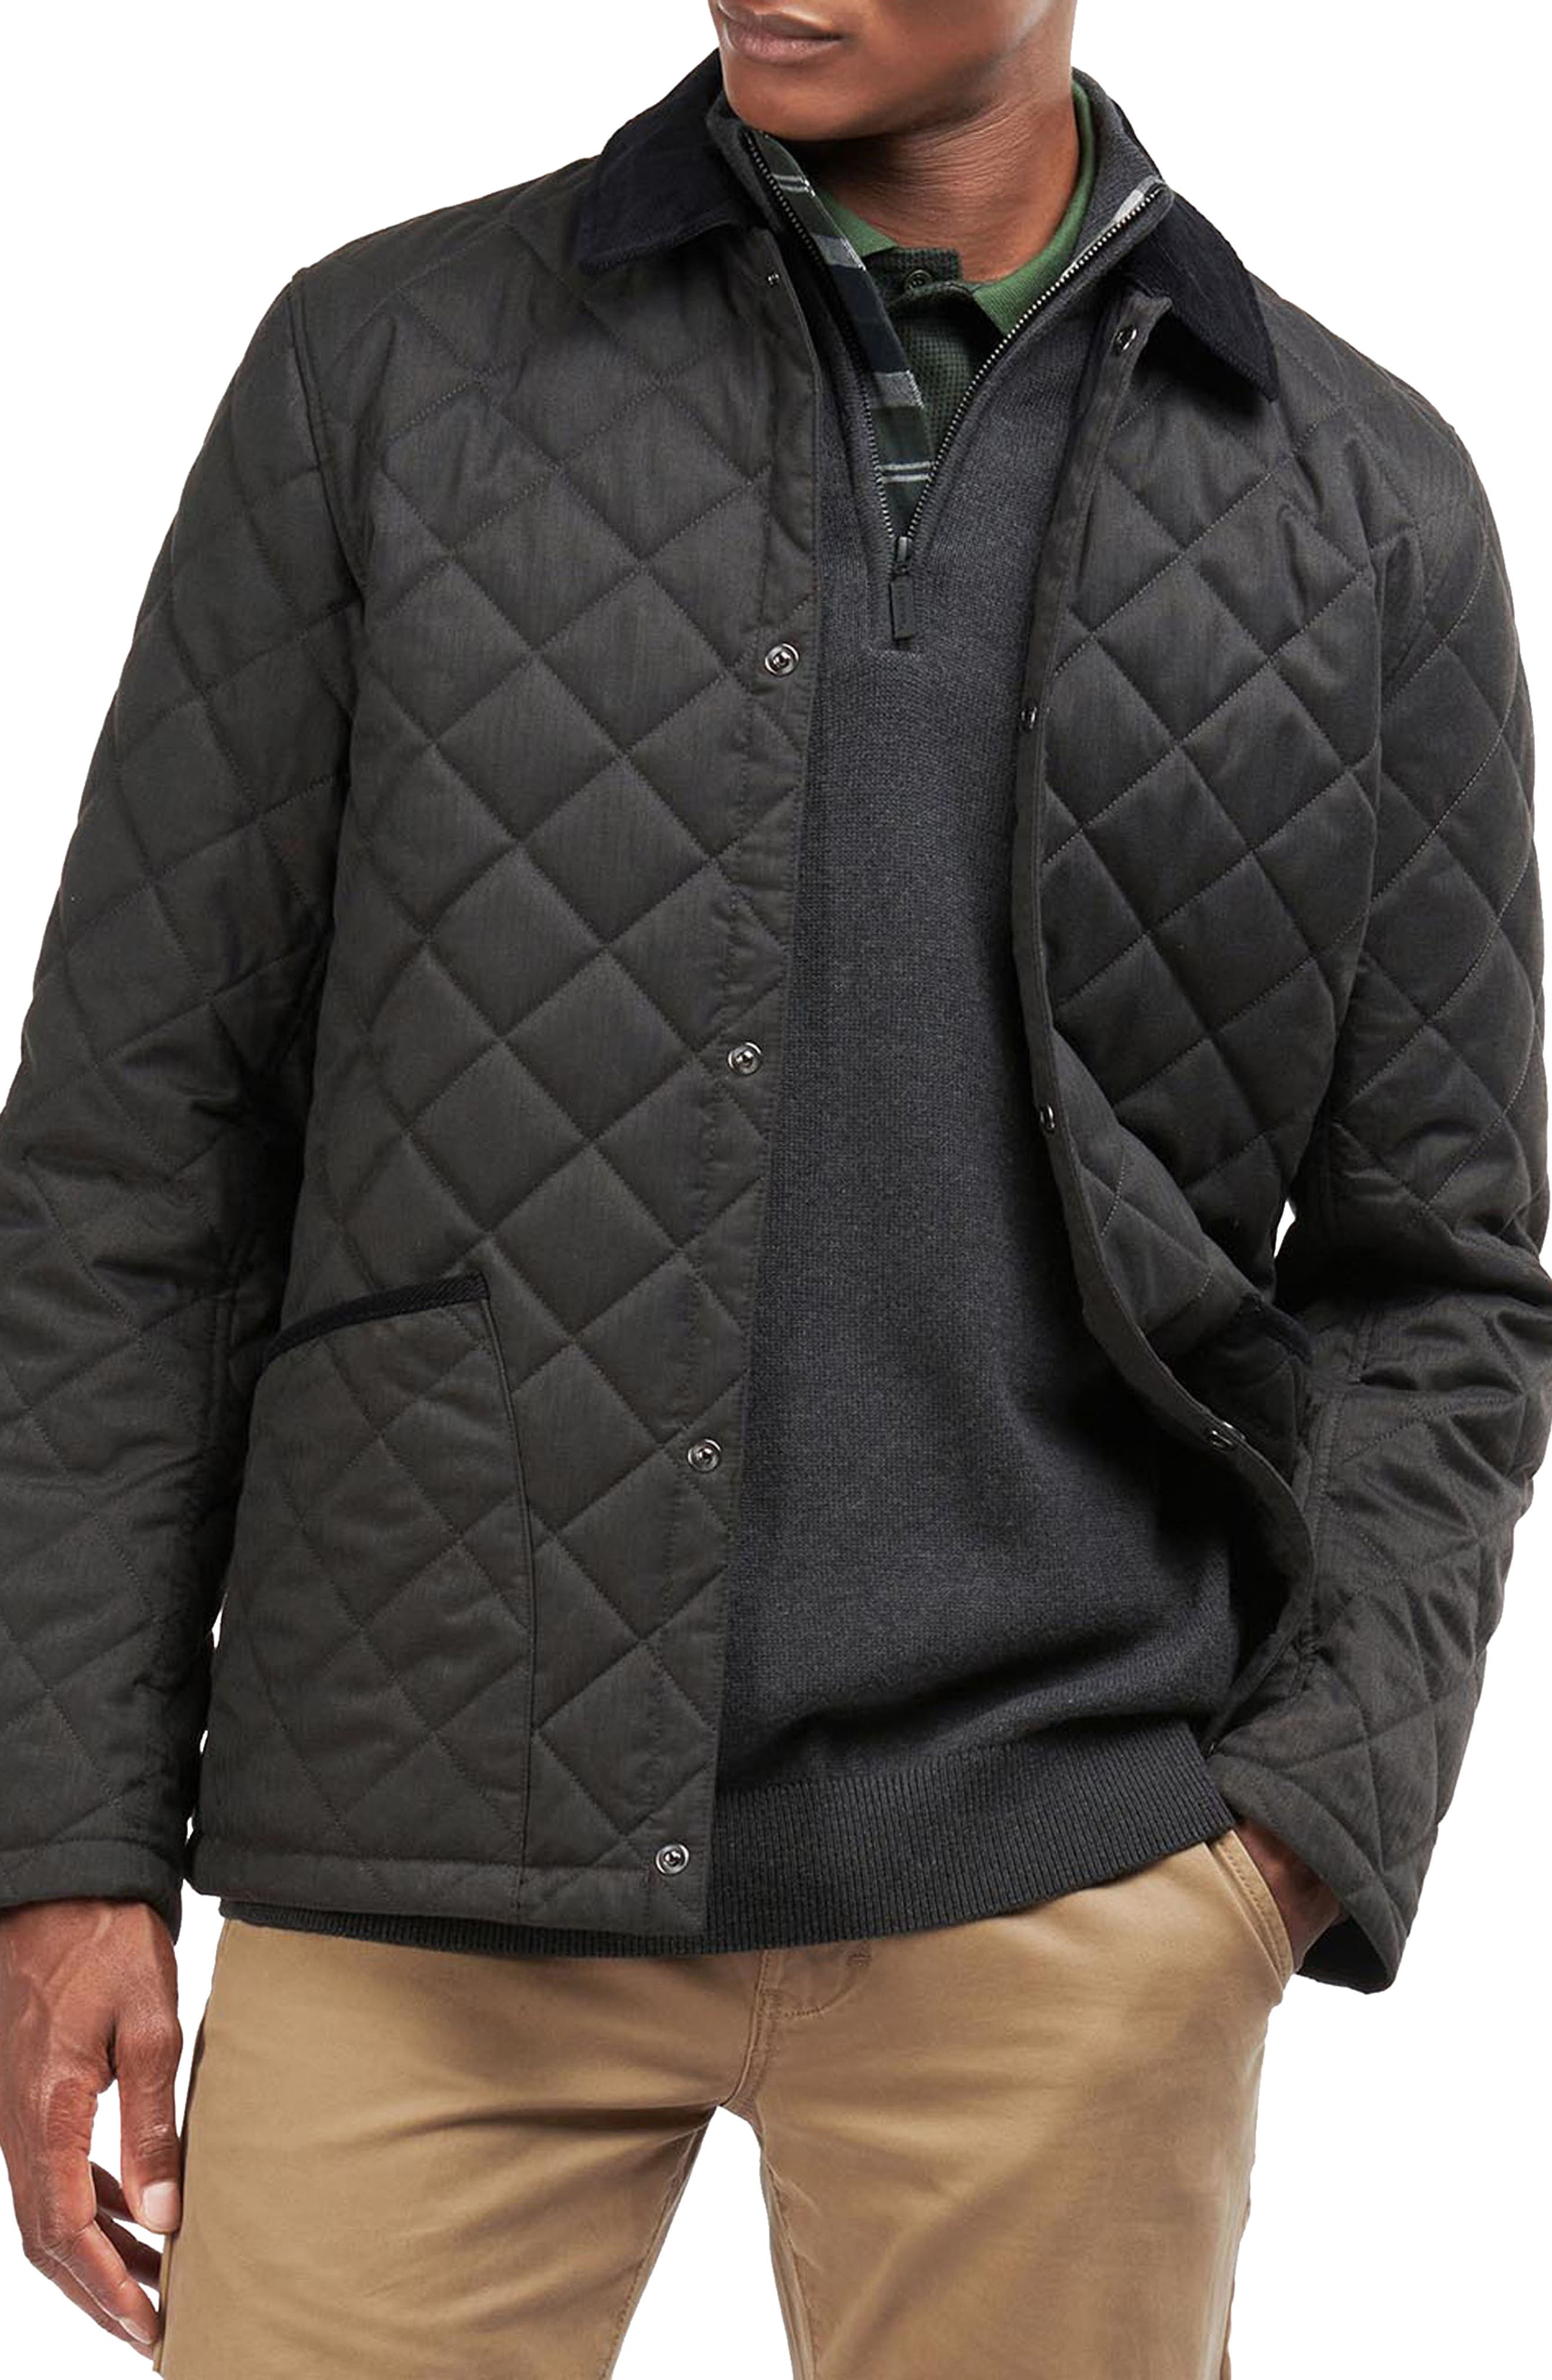 misses quilted jackets